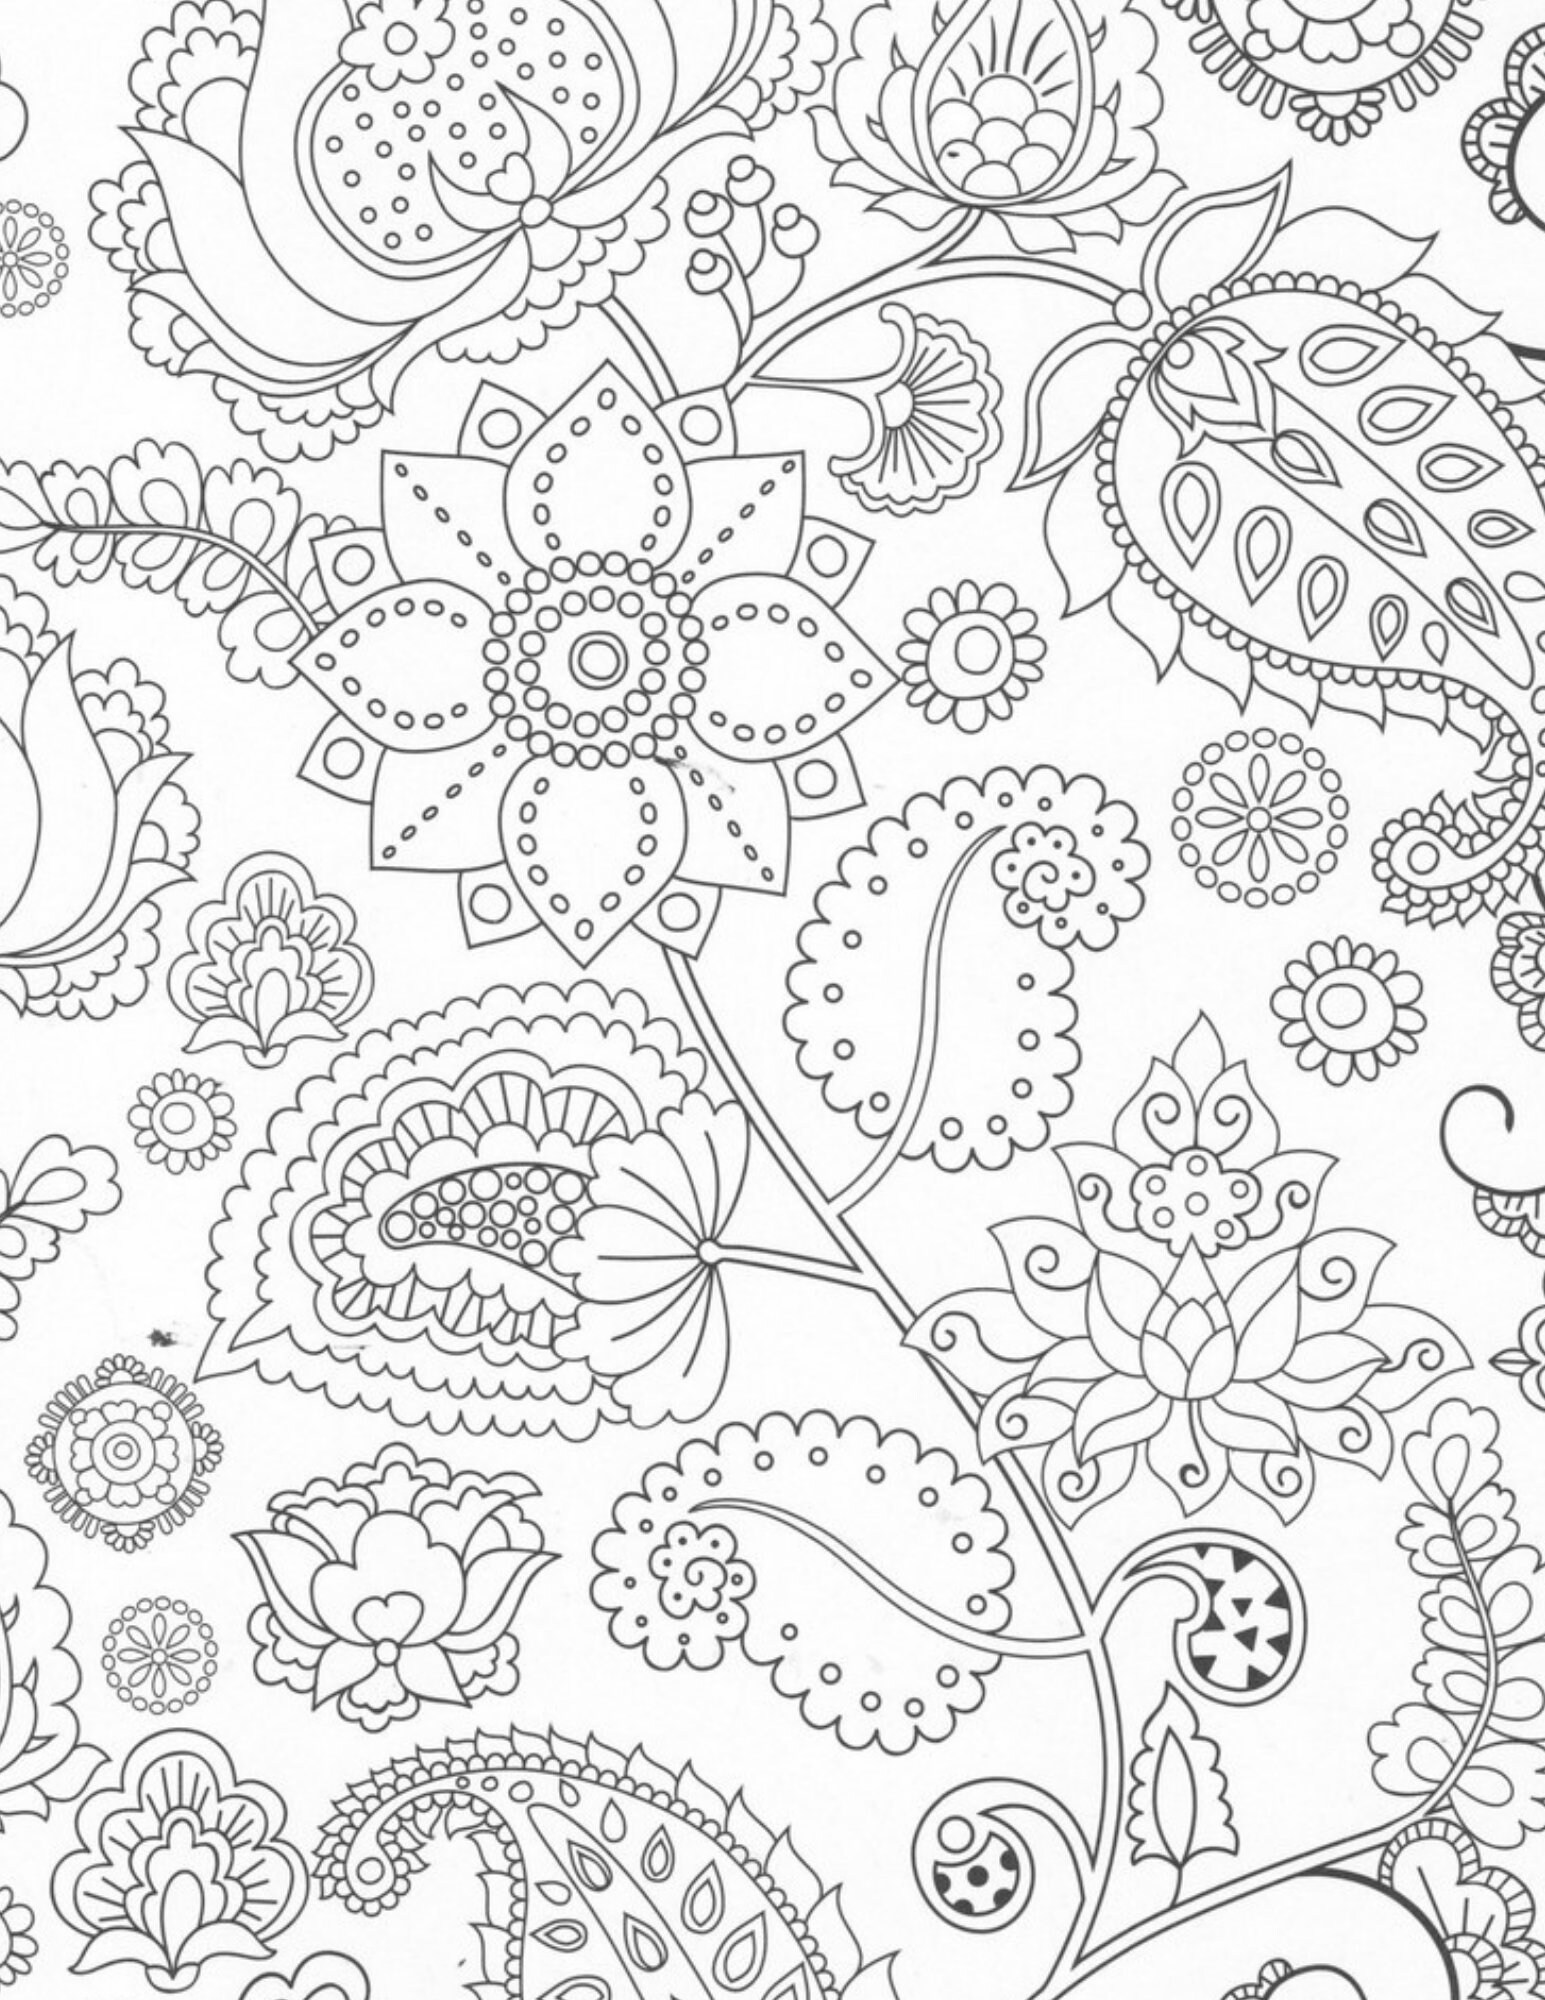 Anti anxiety coloring book for adults by Mega Mirak